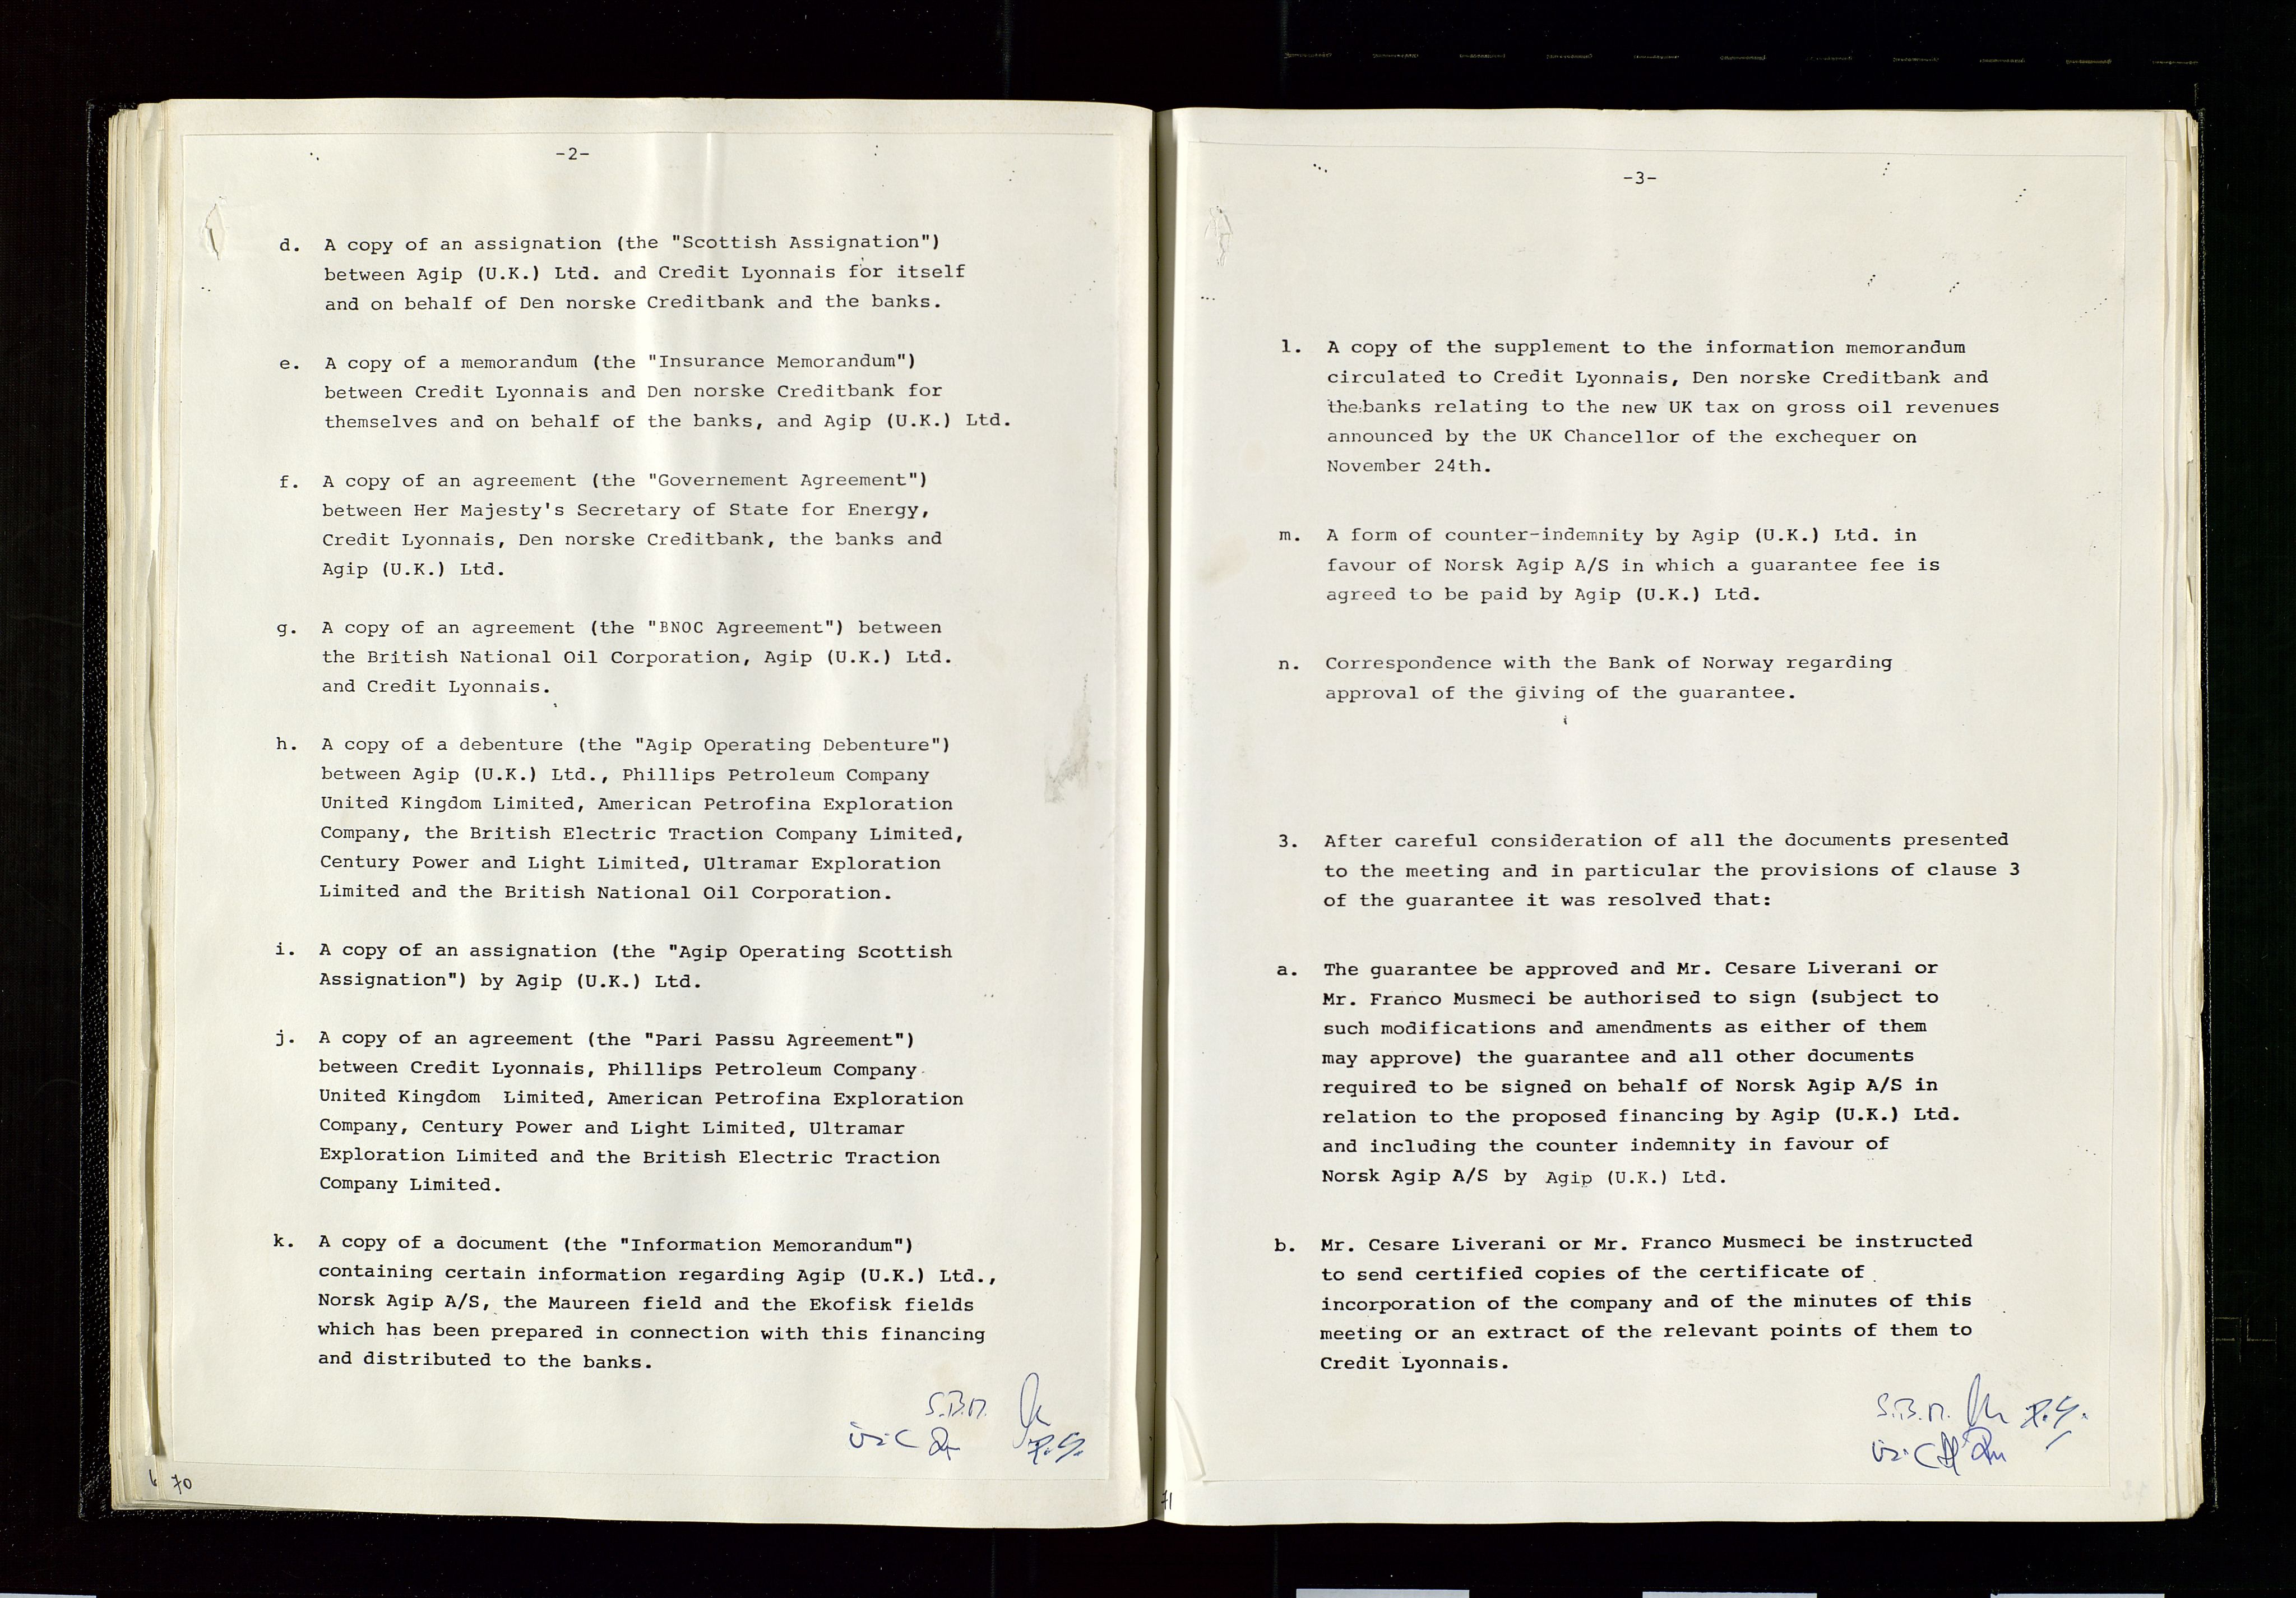 Pa 1583 - Norsk Agip AS, SAST/A-102138/A/Aa/L0003: Board of Directors meeting minutes, 1979-1983, s. 70-71